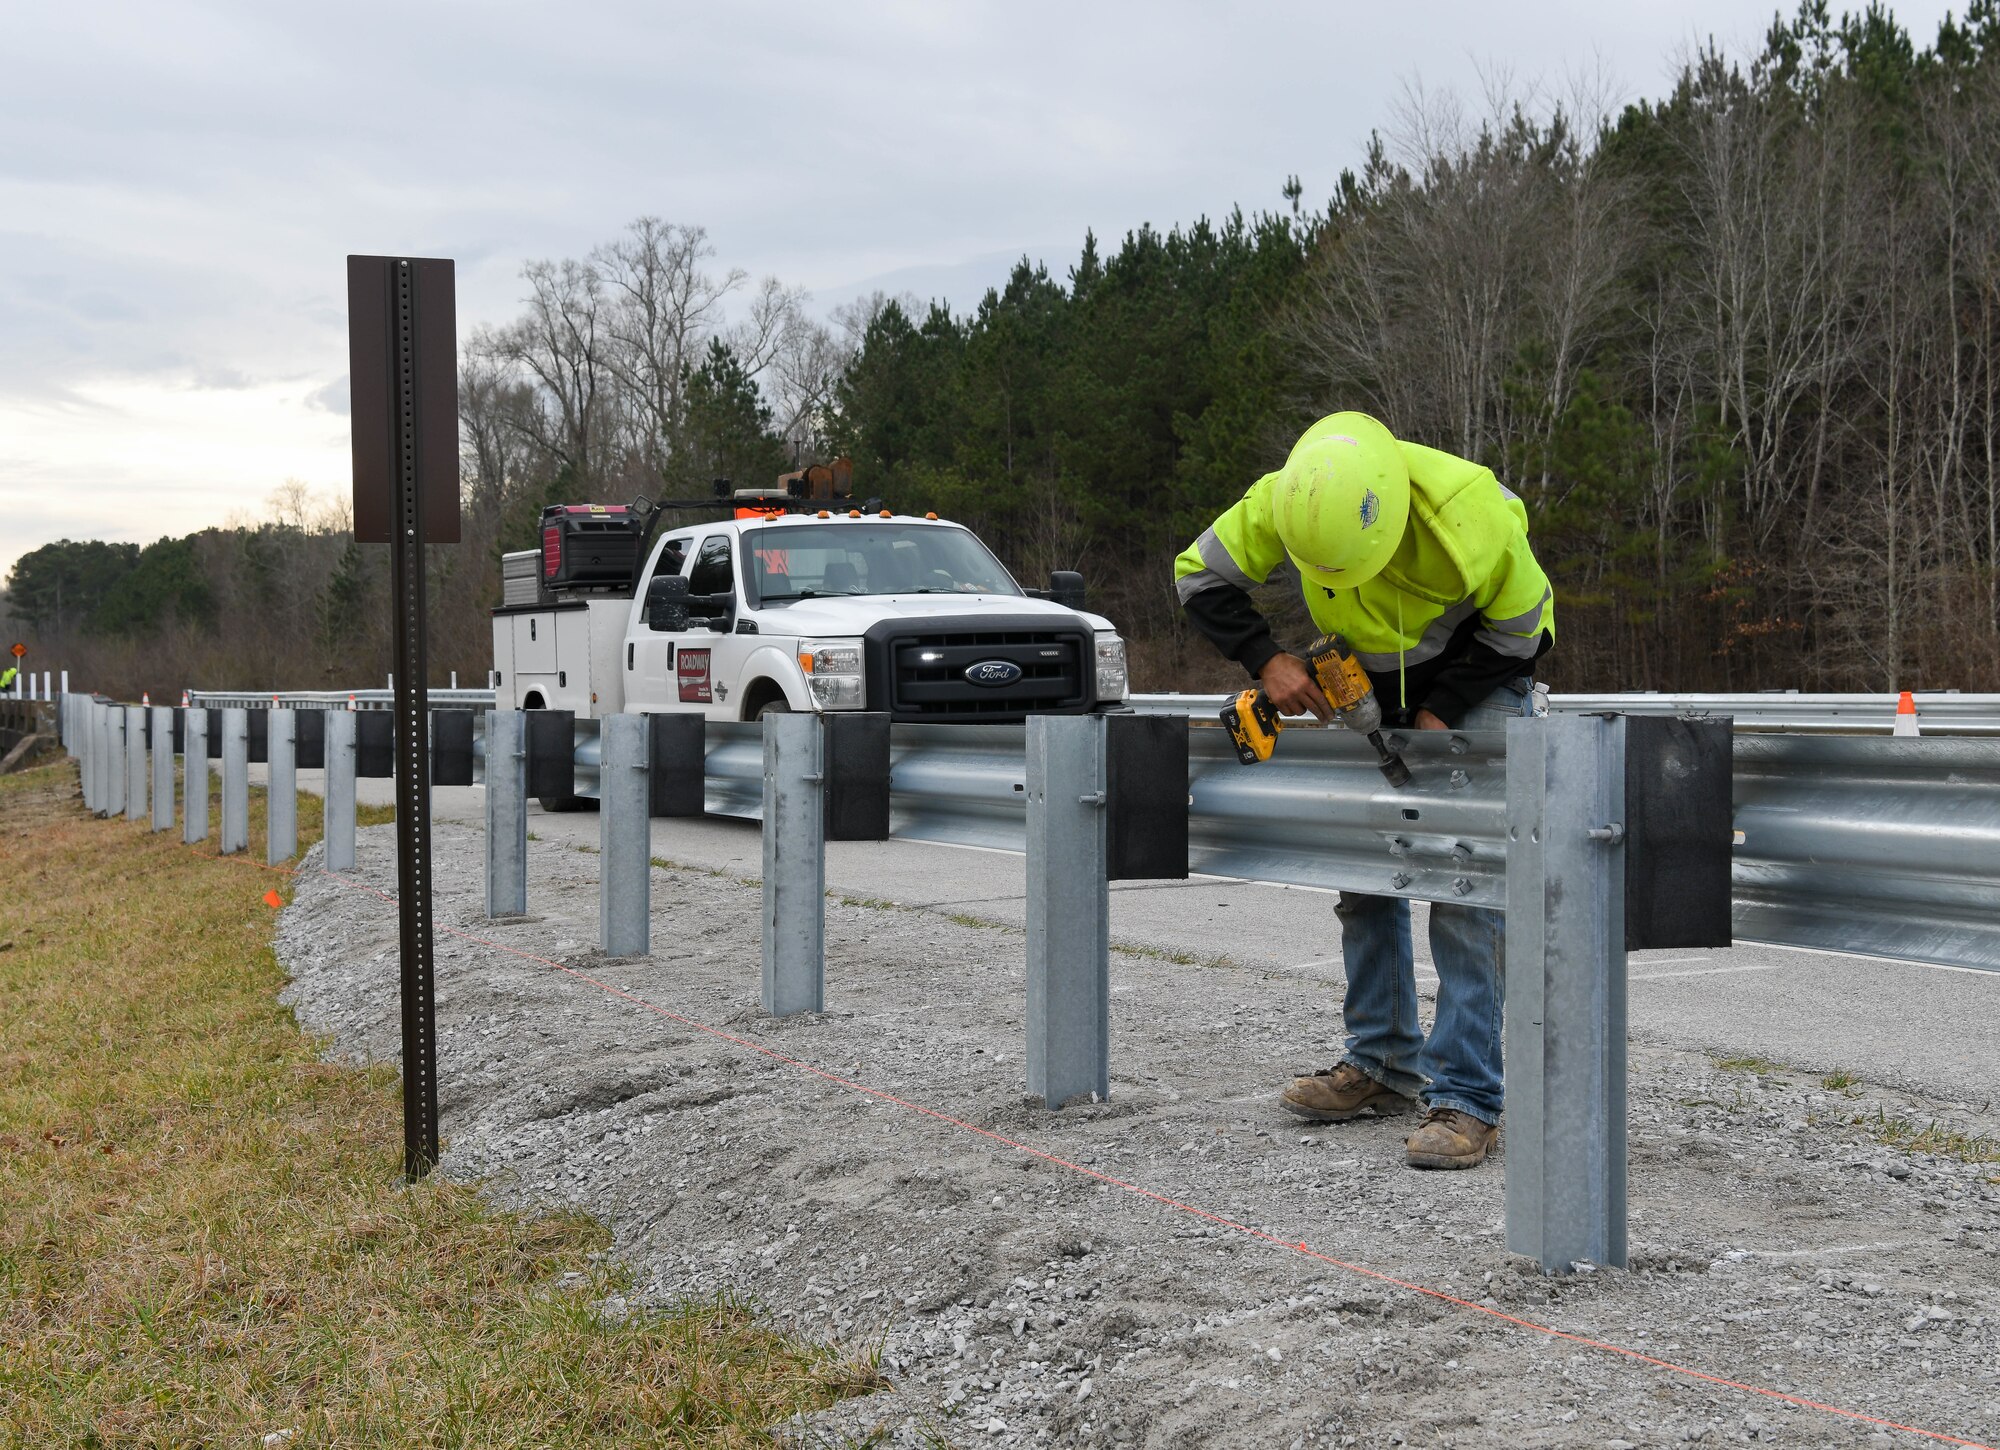 Ben Dees secures a section of guardrail while working on a crew installing new guardrails along Wattendorf Memorial Highway at Arnold Air Force Base, Tenn., Jan. 27, 2021. Guardrails were added to areas where the shoulder drops off and at bridge ends to increase safety for motorists. (U.S. Air Force photo by Jill Pickett)